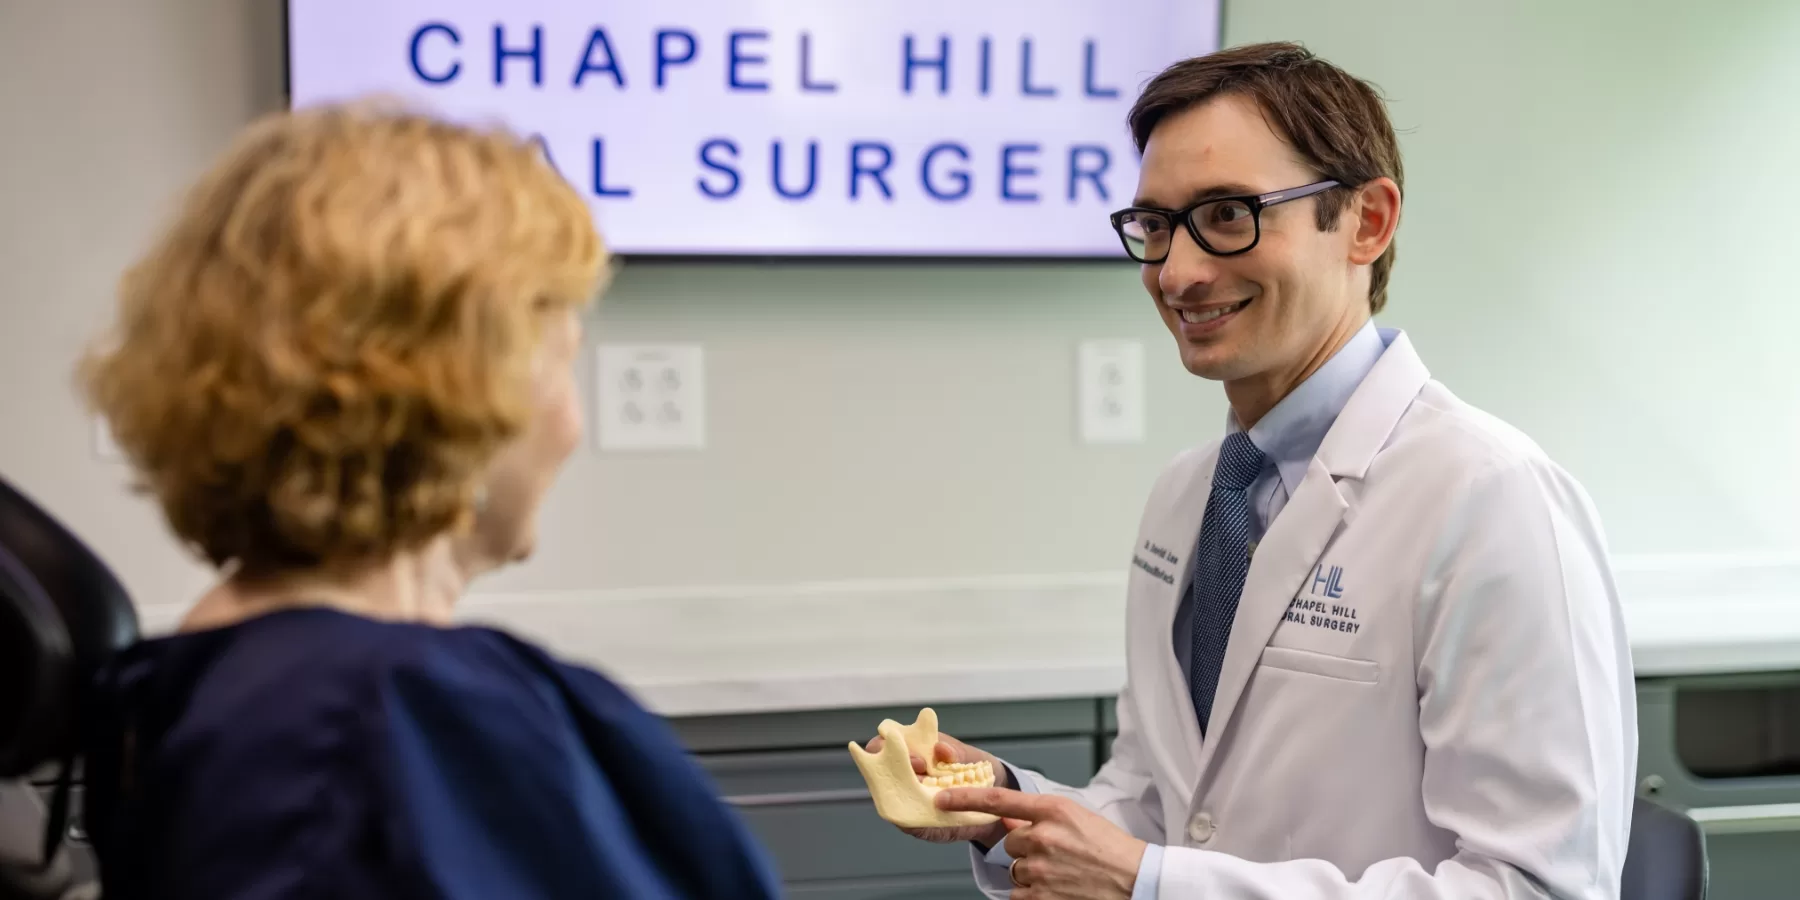 Chapel hill oral surgery